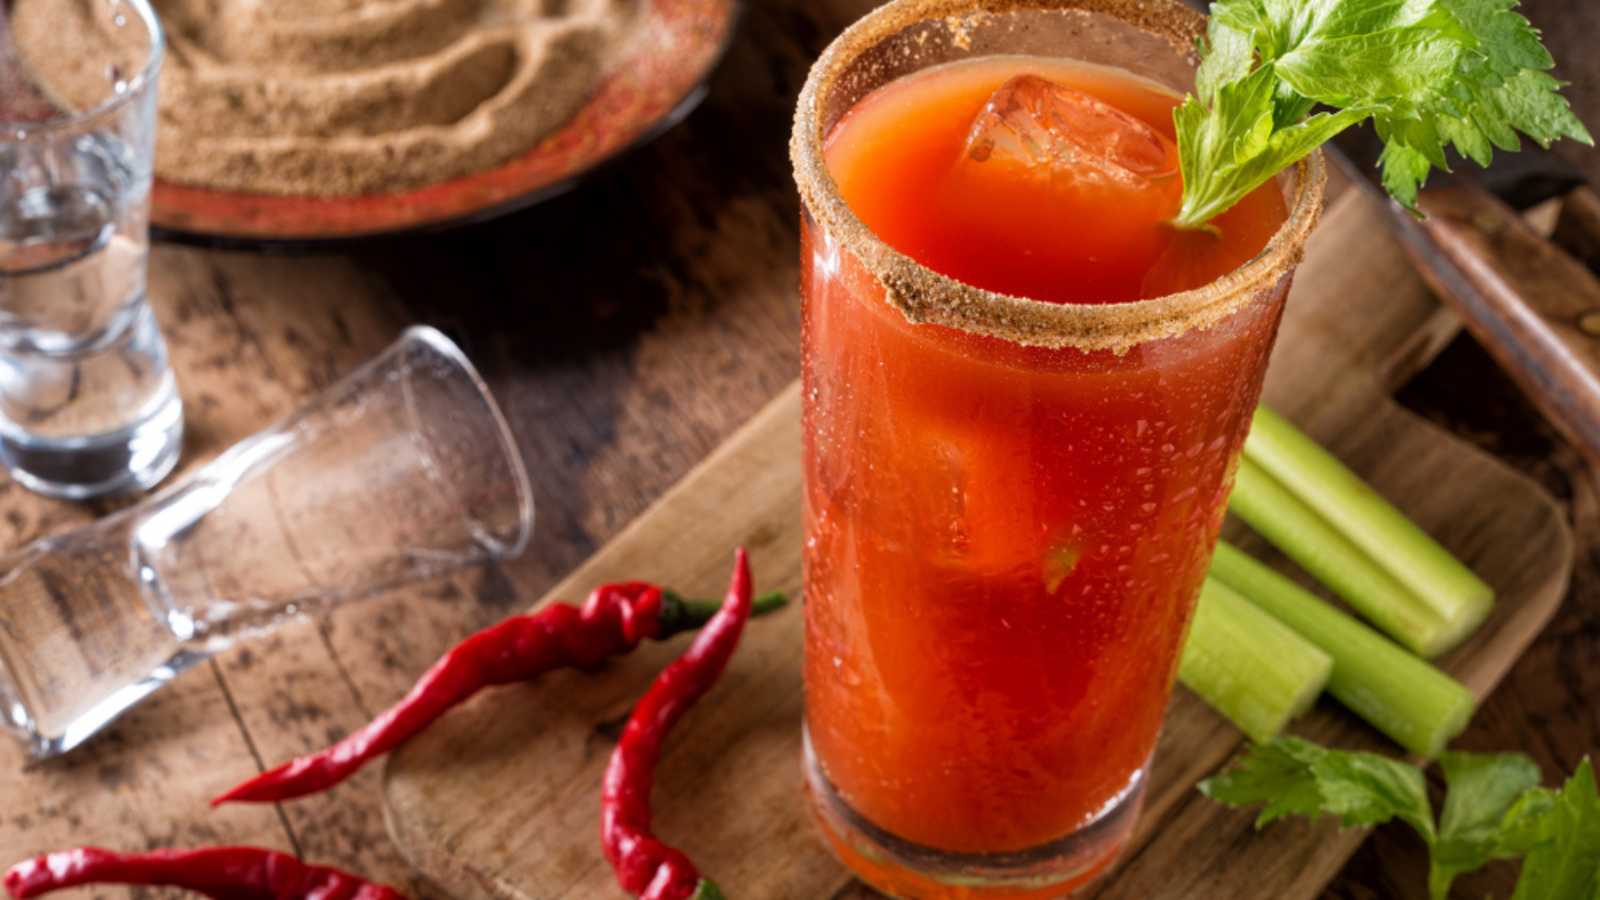 A delicious spicy bloody caesar cocktail with vodka, tomato juice, clam juice, hot sauce and celery.